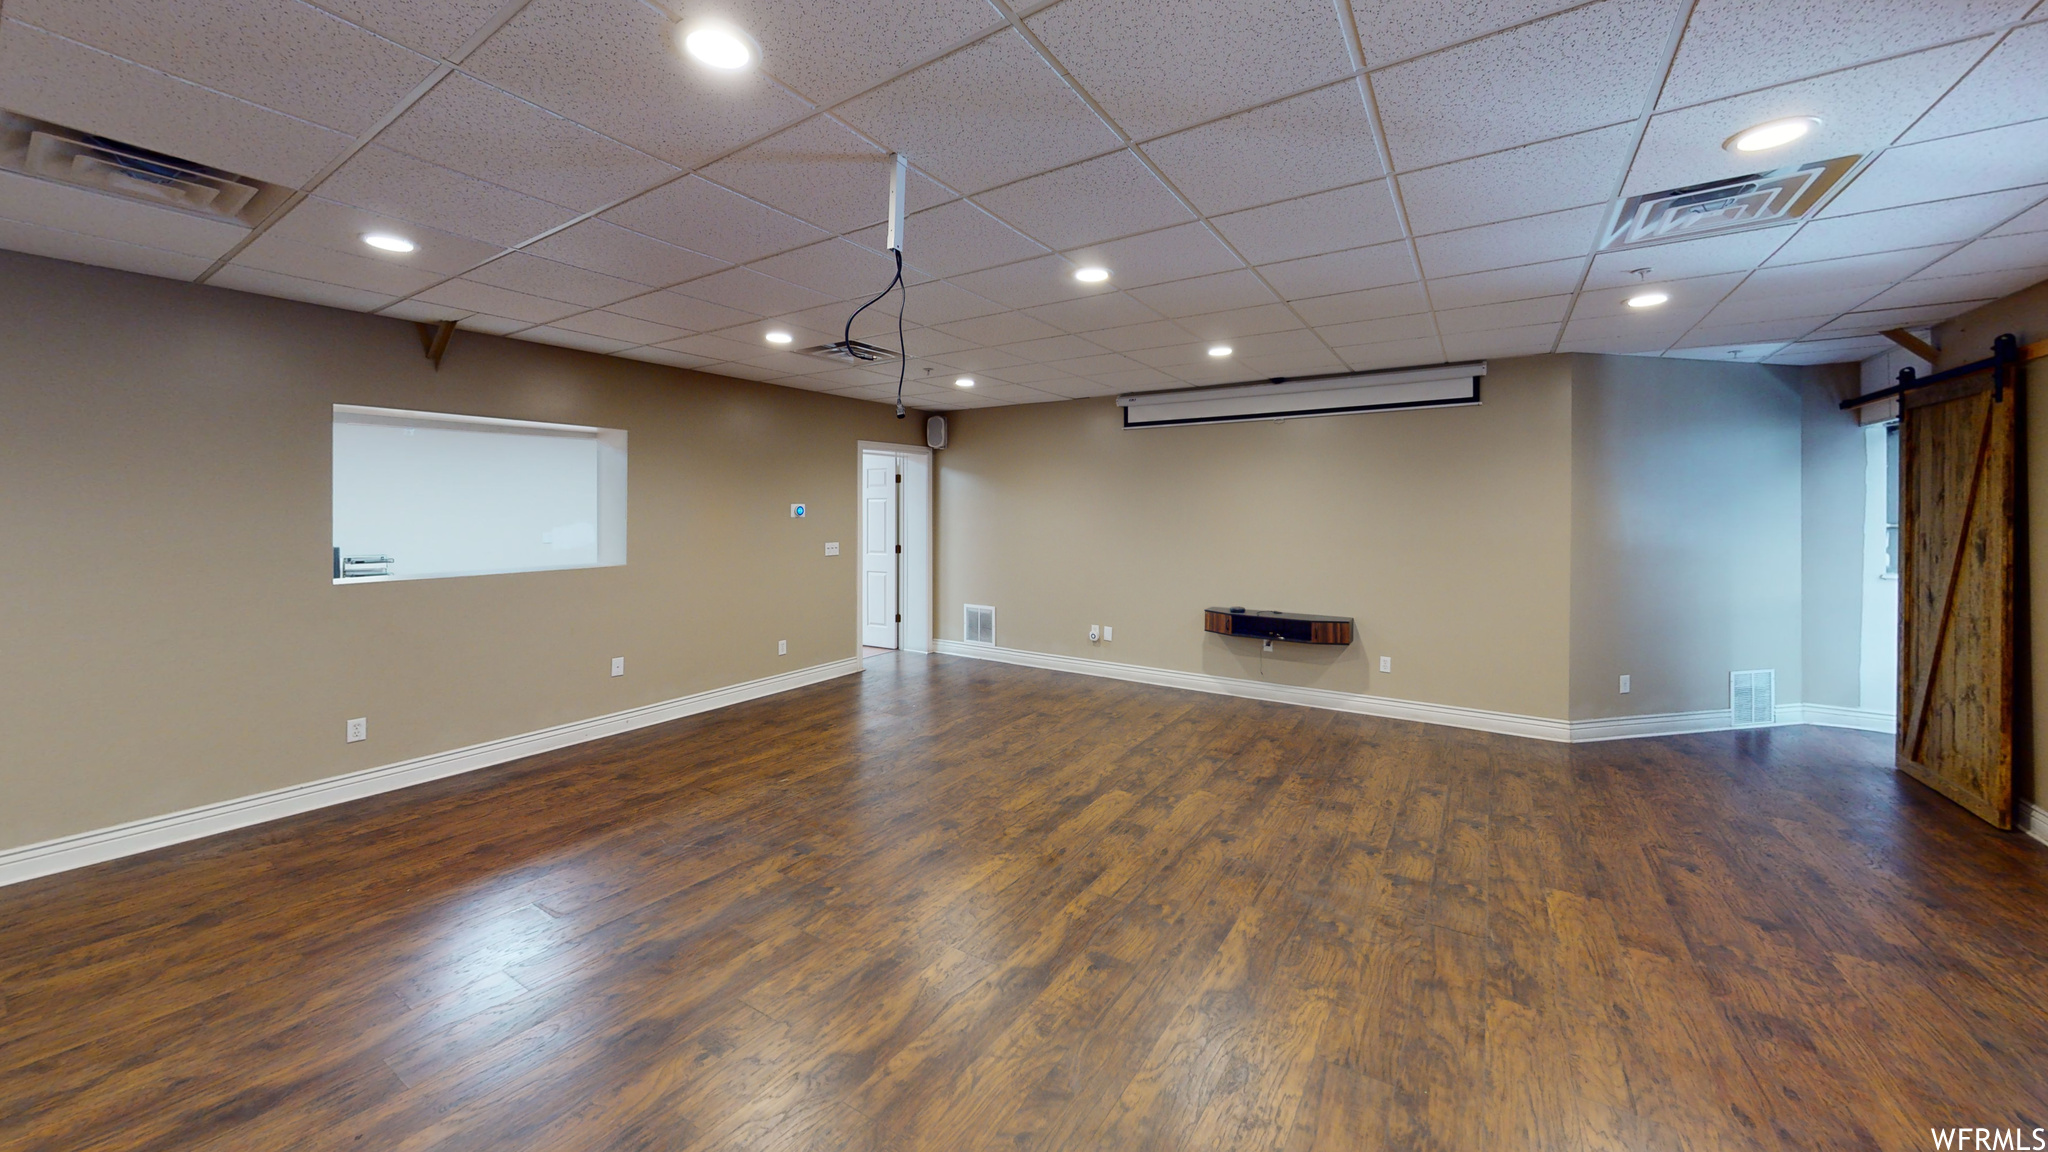 Hardwood floored spare room with a drop ceiling